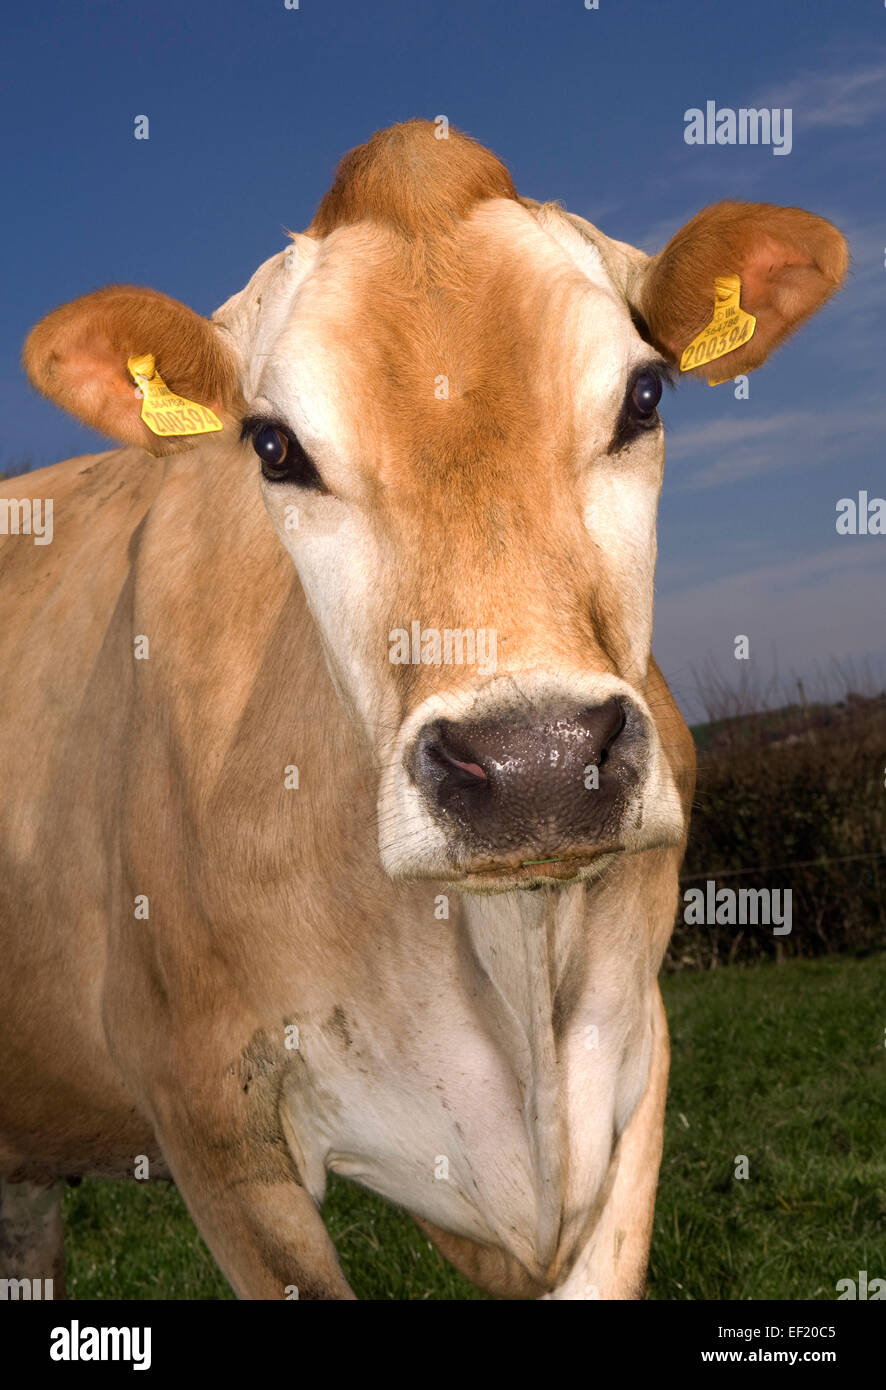 Jersey cow on a farm in Cornwall,used for the quality of its milk used for  dairy products,cream,cheese,ice-cream.a UK farming Stock Photo - Alamy